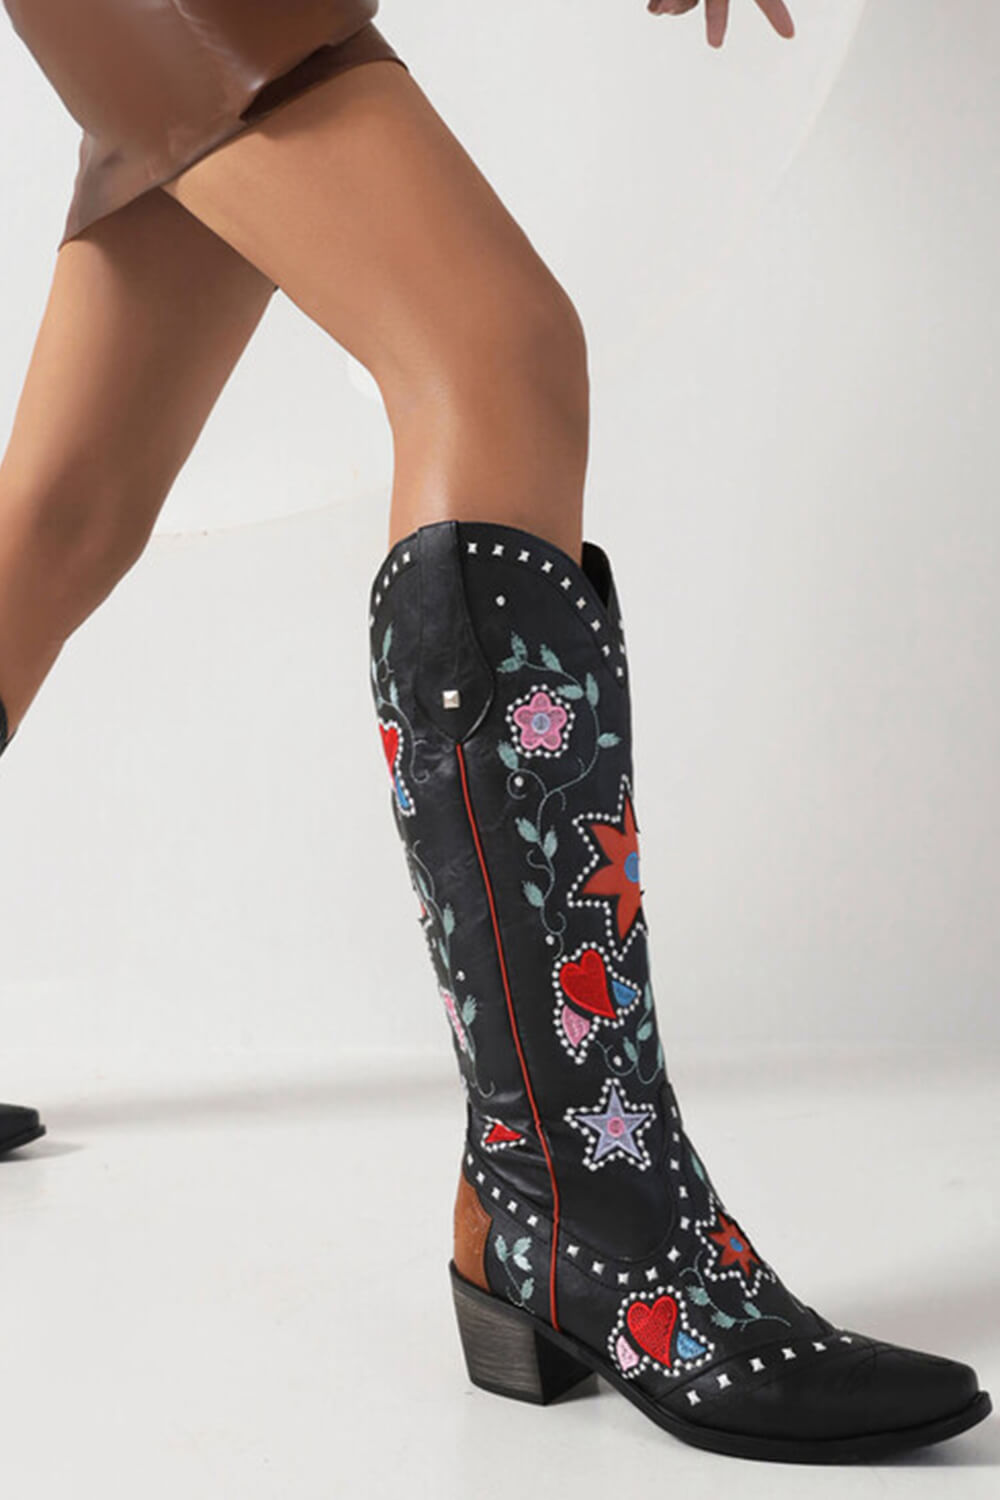 Vintage Floral And Heart Printed Western Cowgirl Block Heeled Knee High Boots - Black